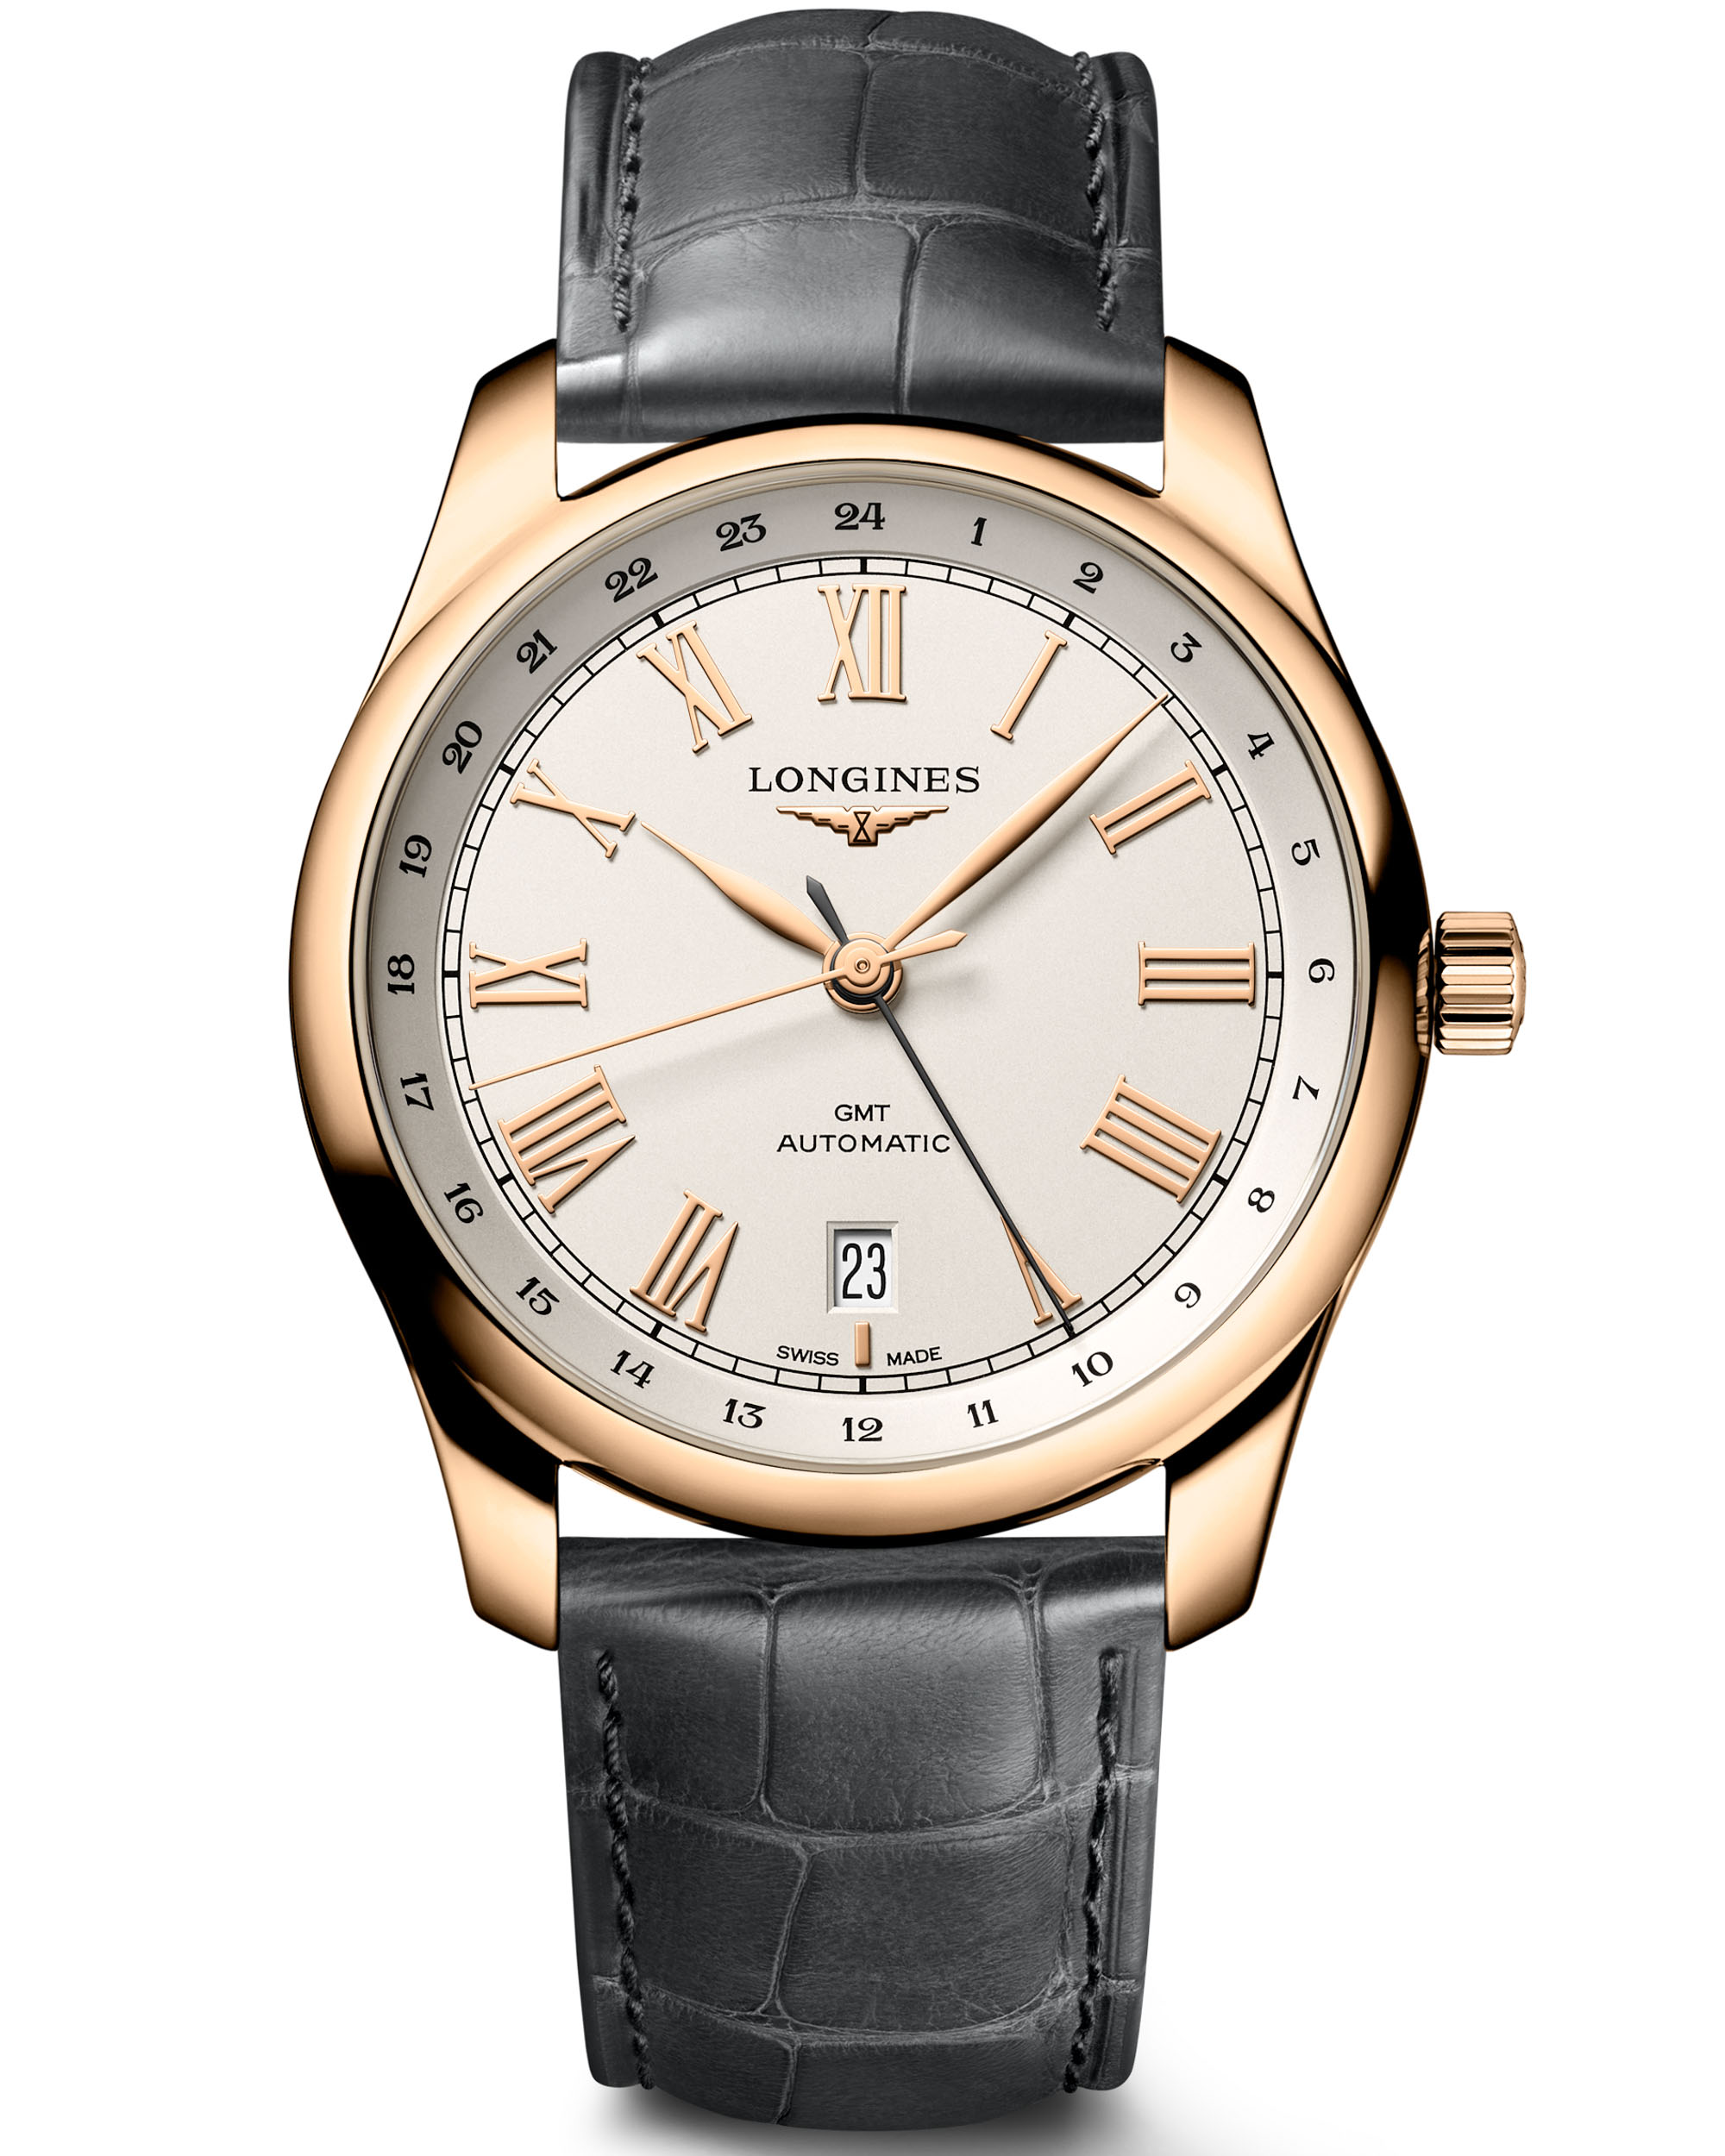 New Release: The Longines Master Collection GMT Watches In 18k Gold